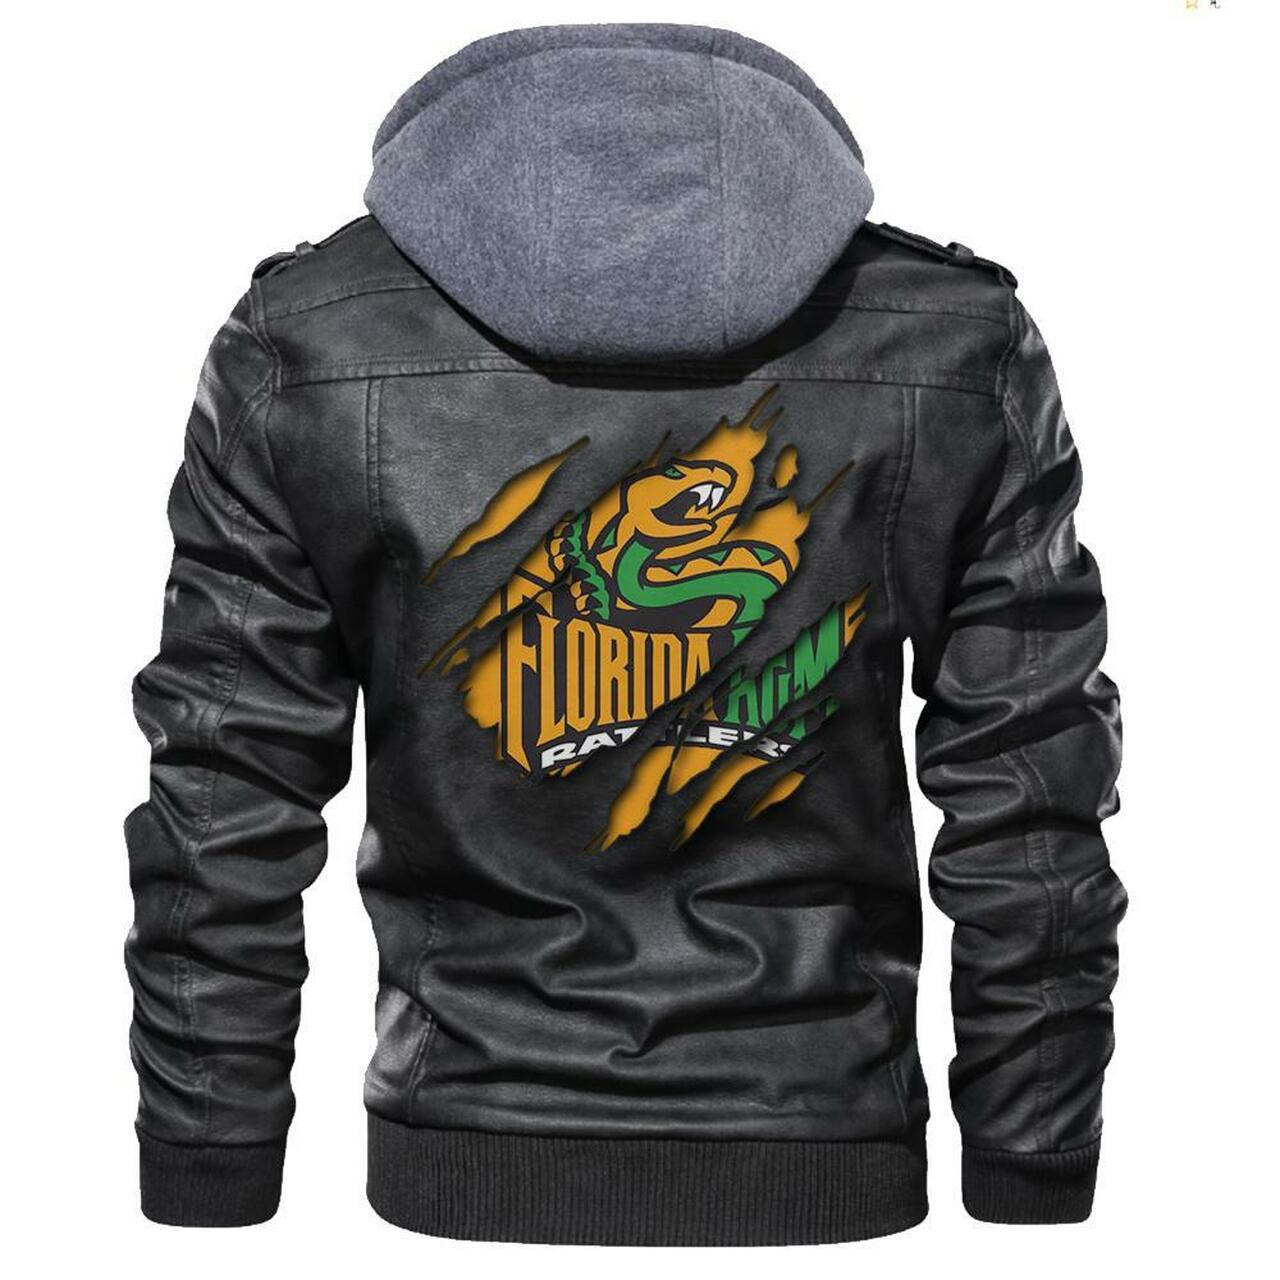 This leather Jacket will look great on you and make you stand out from the crowd 85